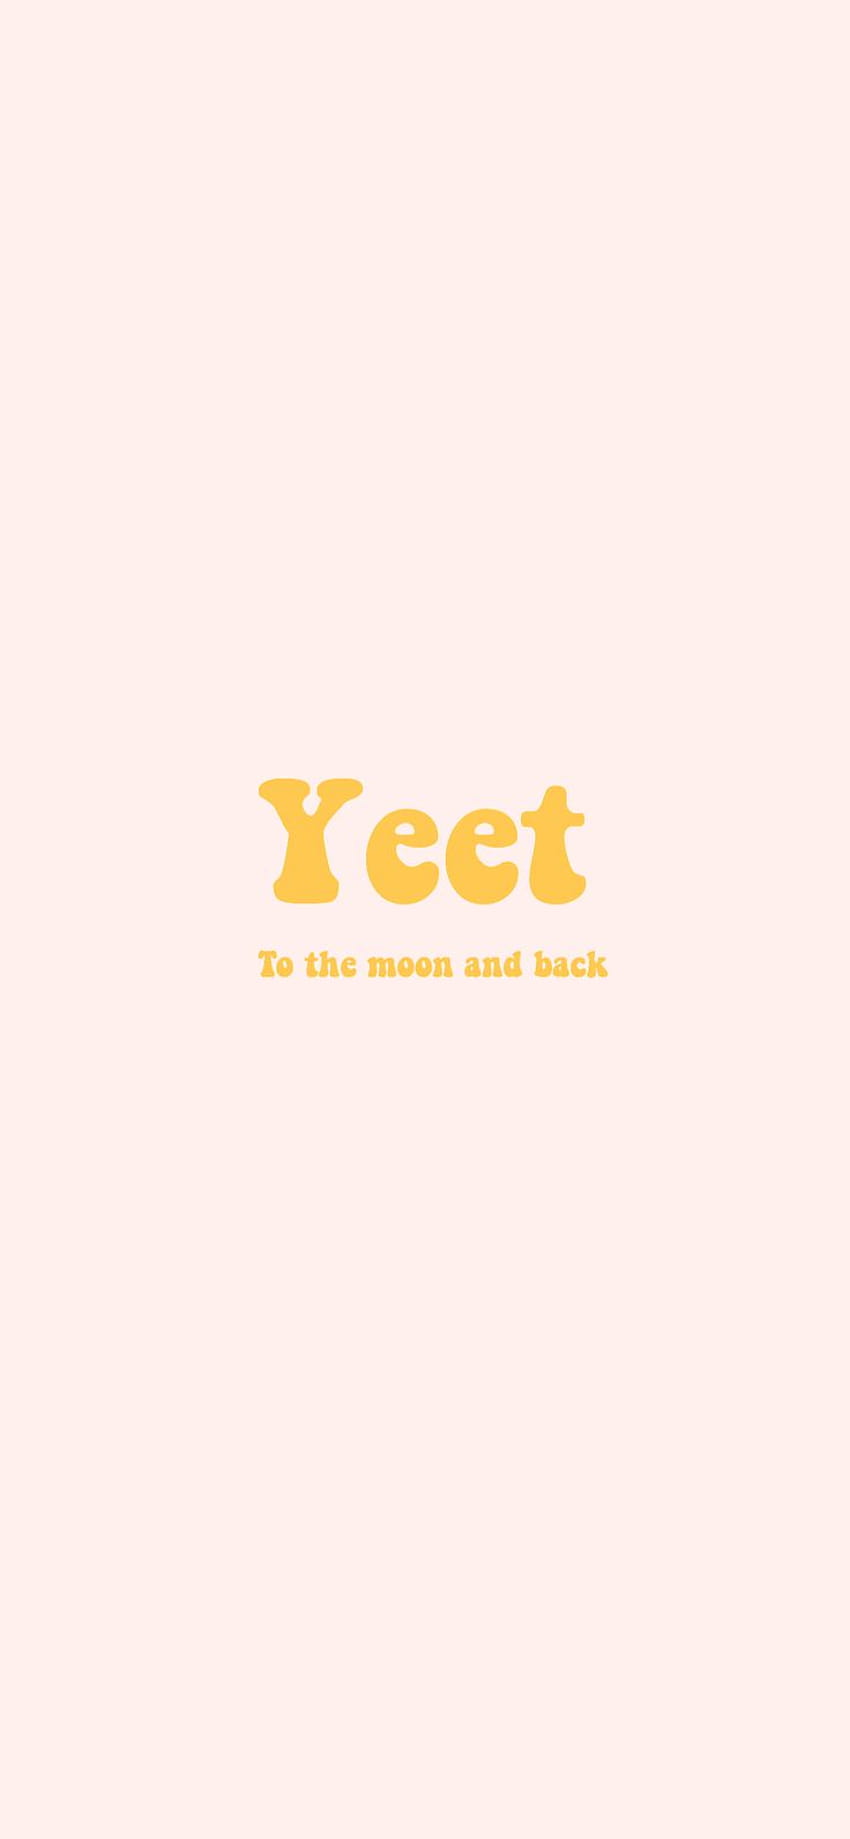 Pink yeet works for all sizes of phones iPhone X, yeet to the moon and back HD phone wallpaper